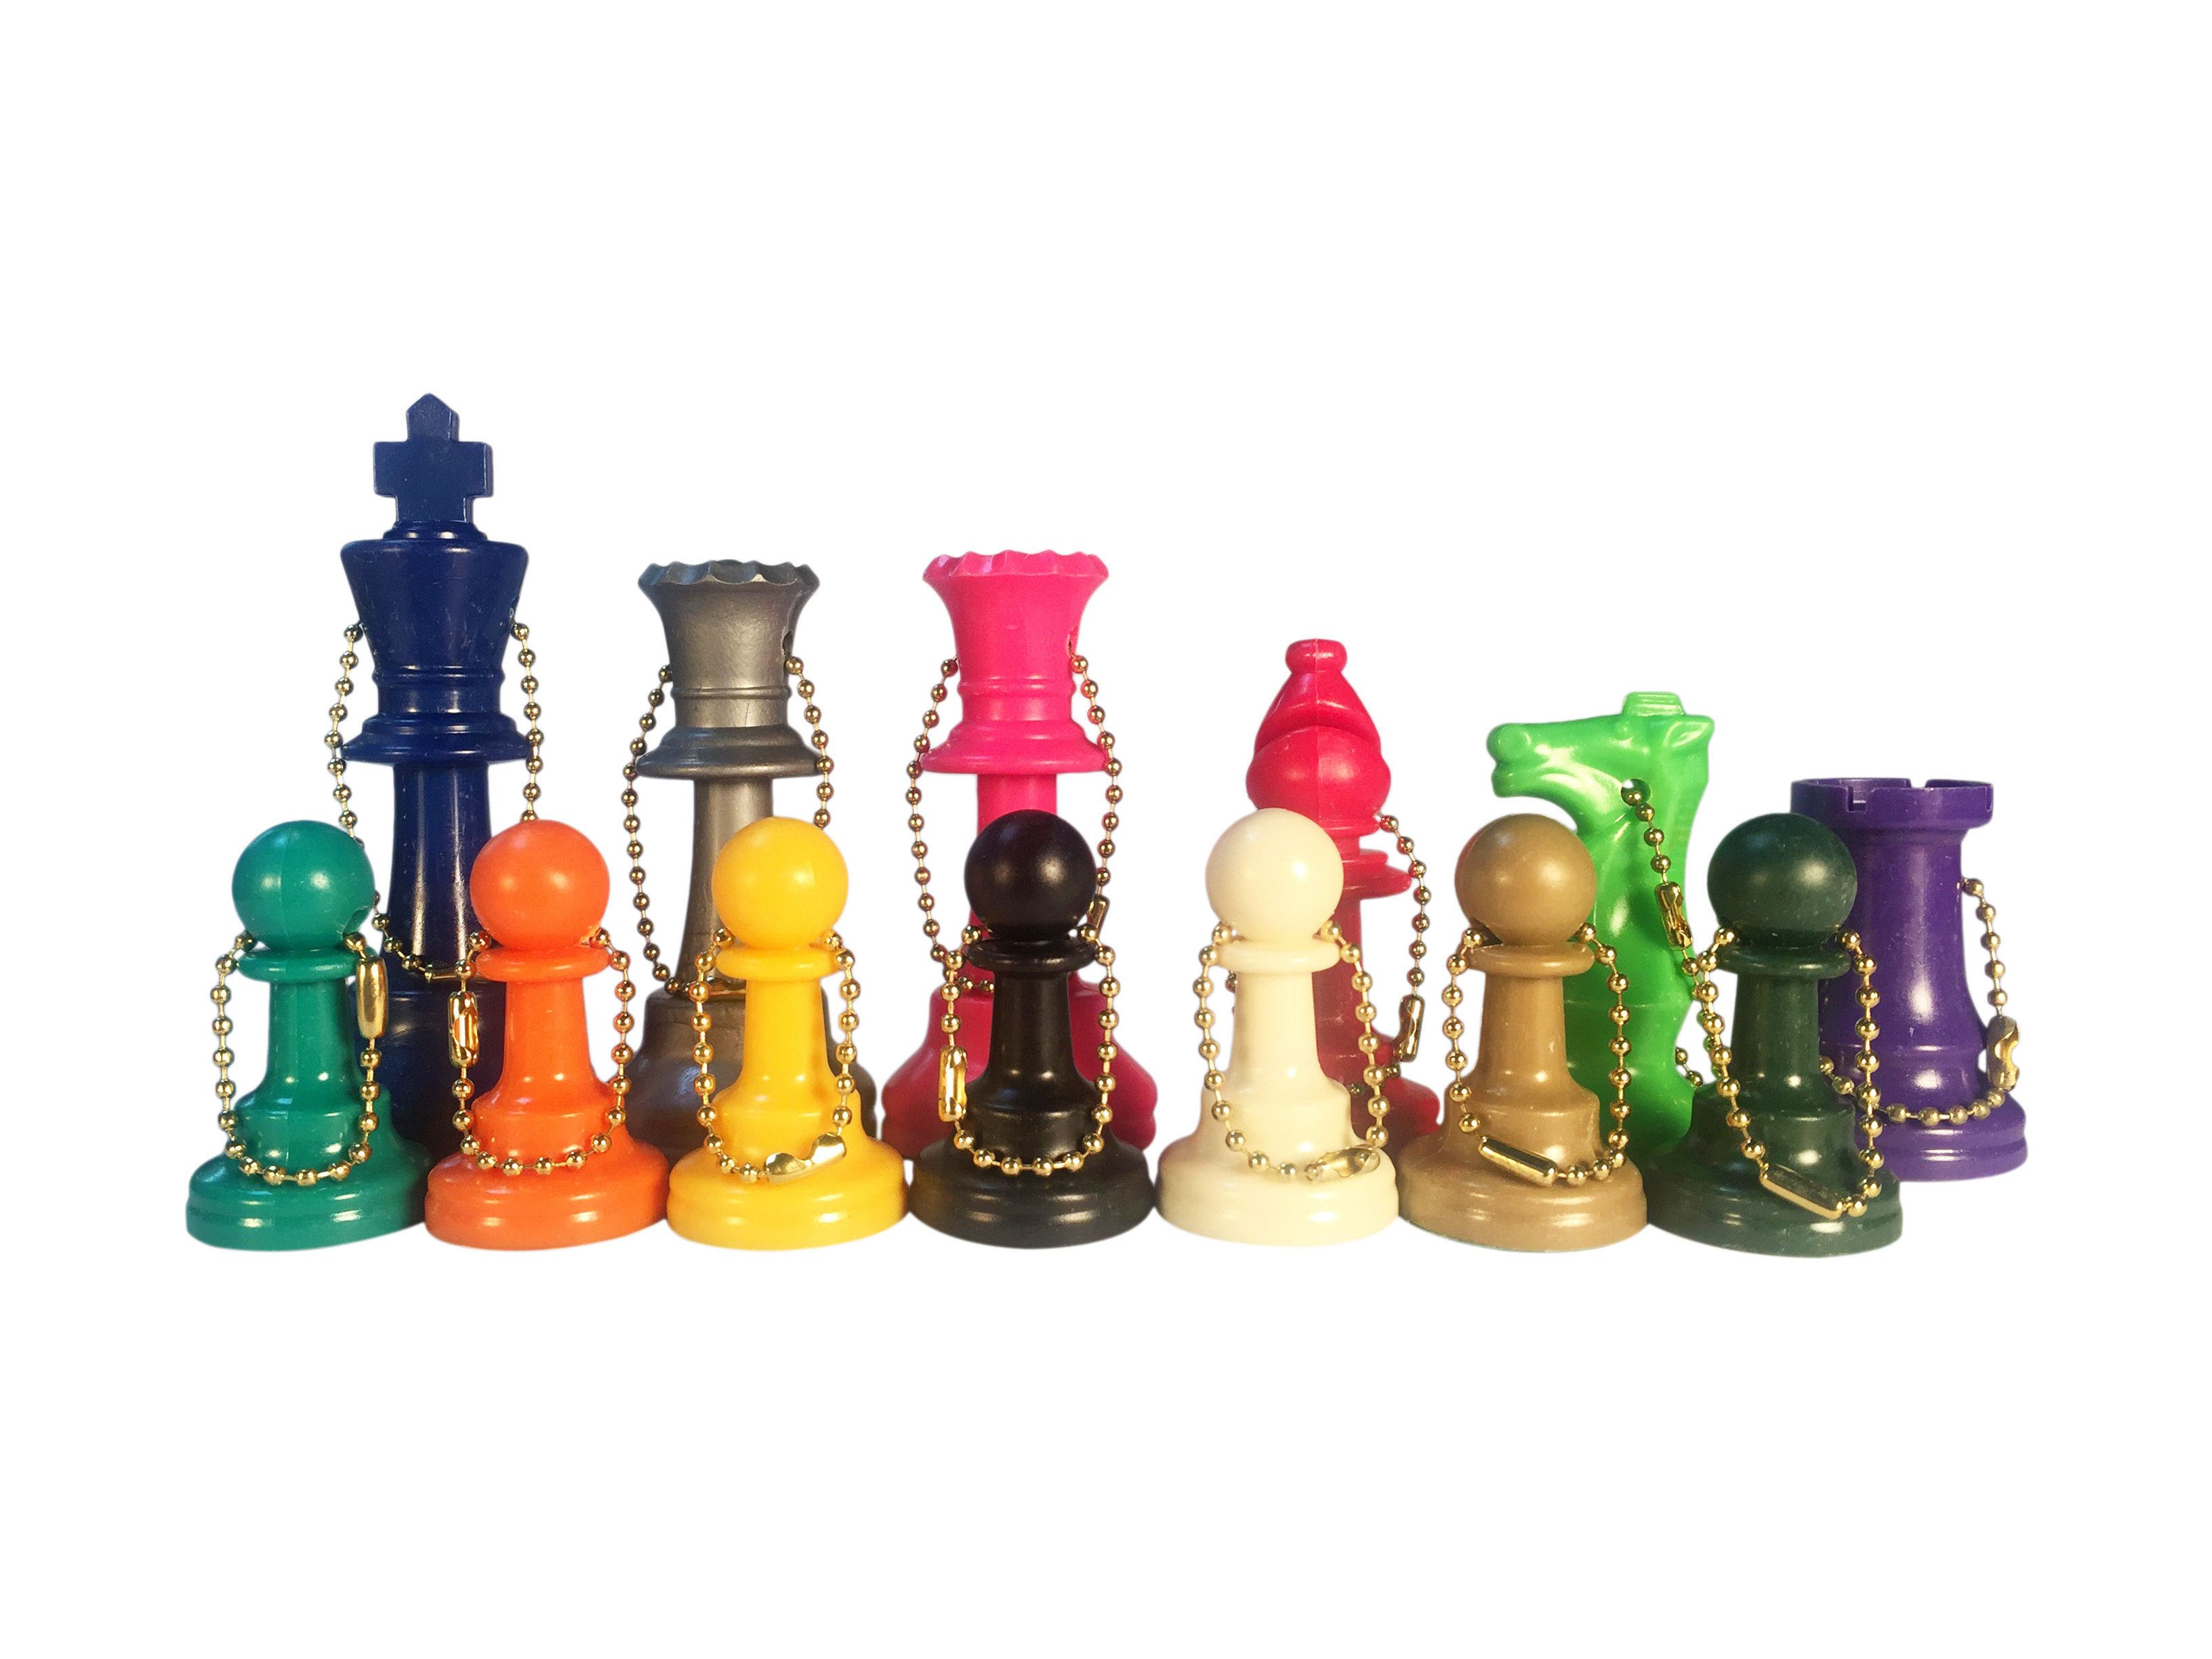 Chess Keychain sides - Full 16 pieces plus an extra Queen!